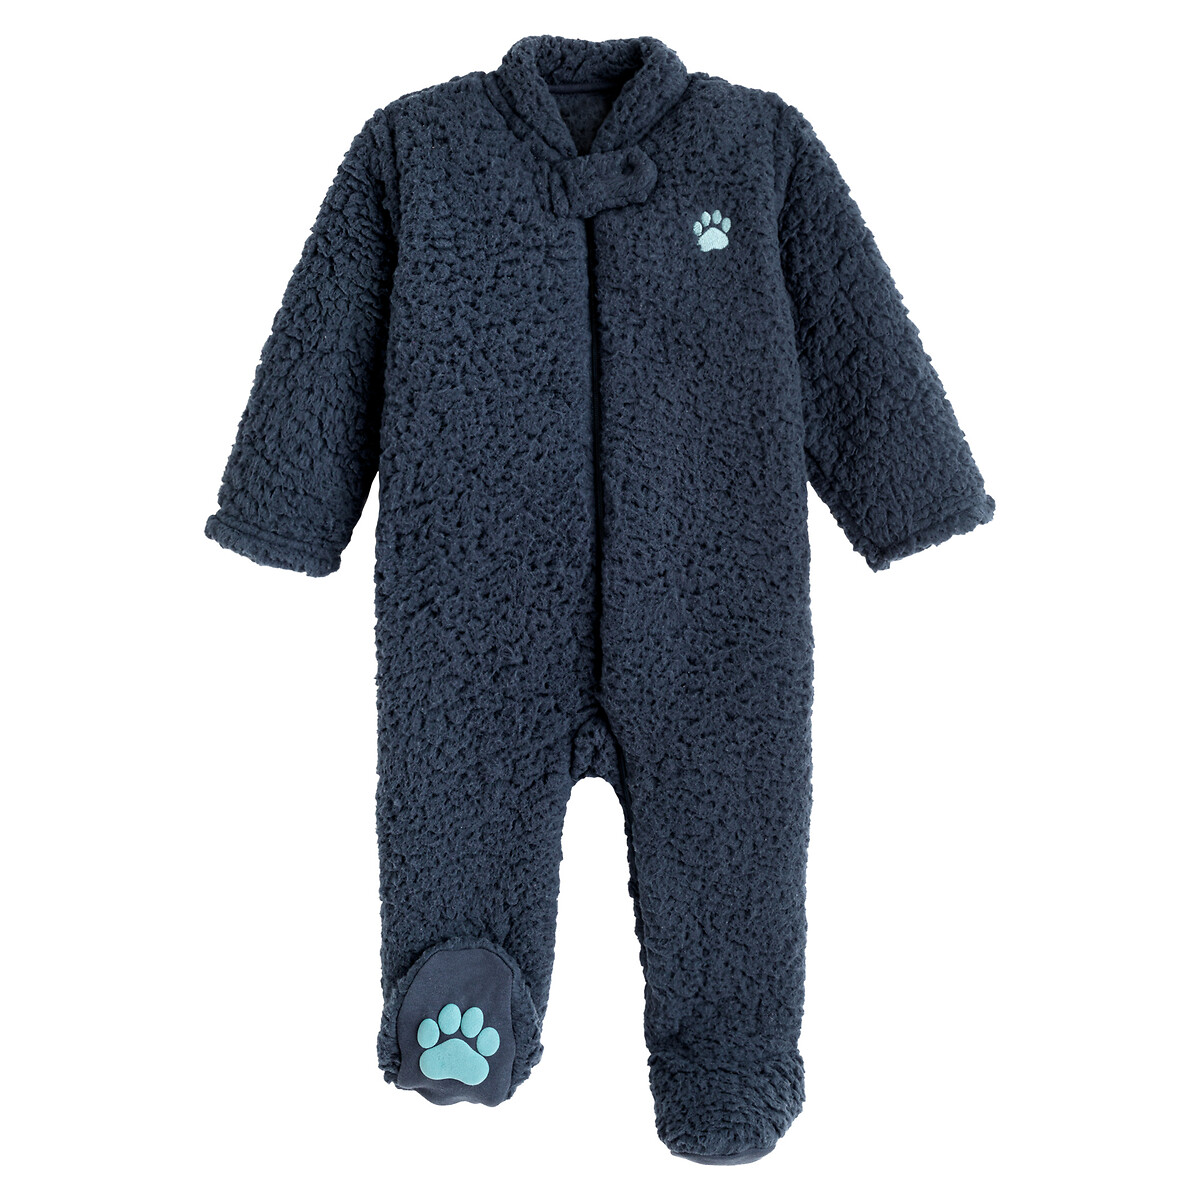 Recycled Fluffy Fleece Onesie, Birth-3 Years By La Redoute